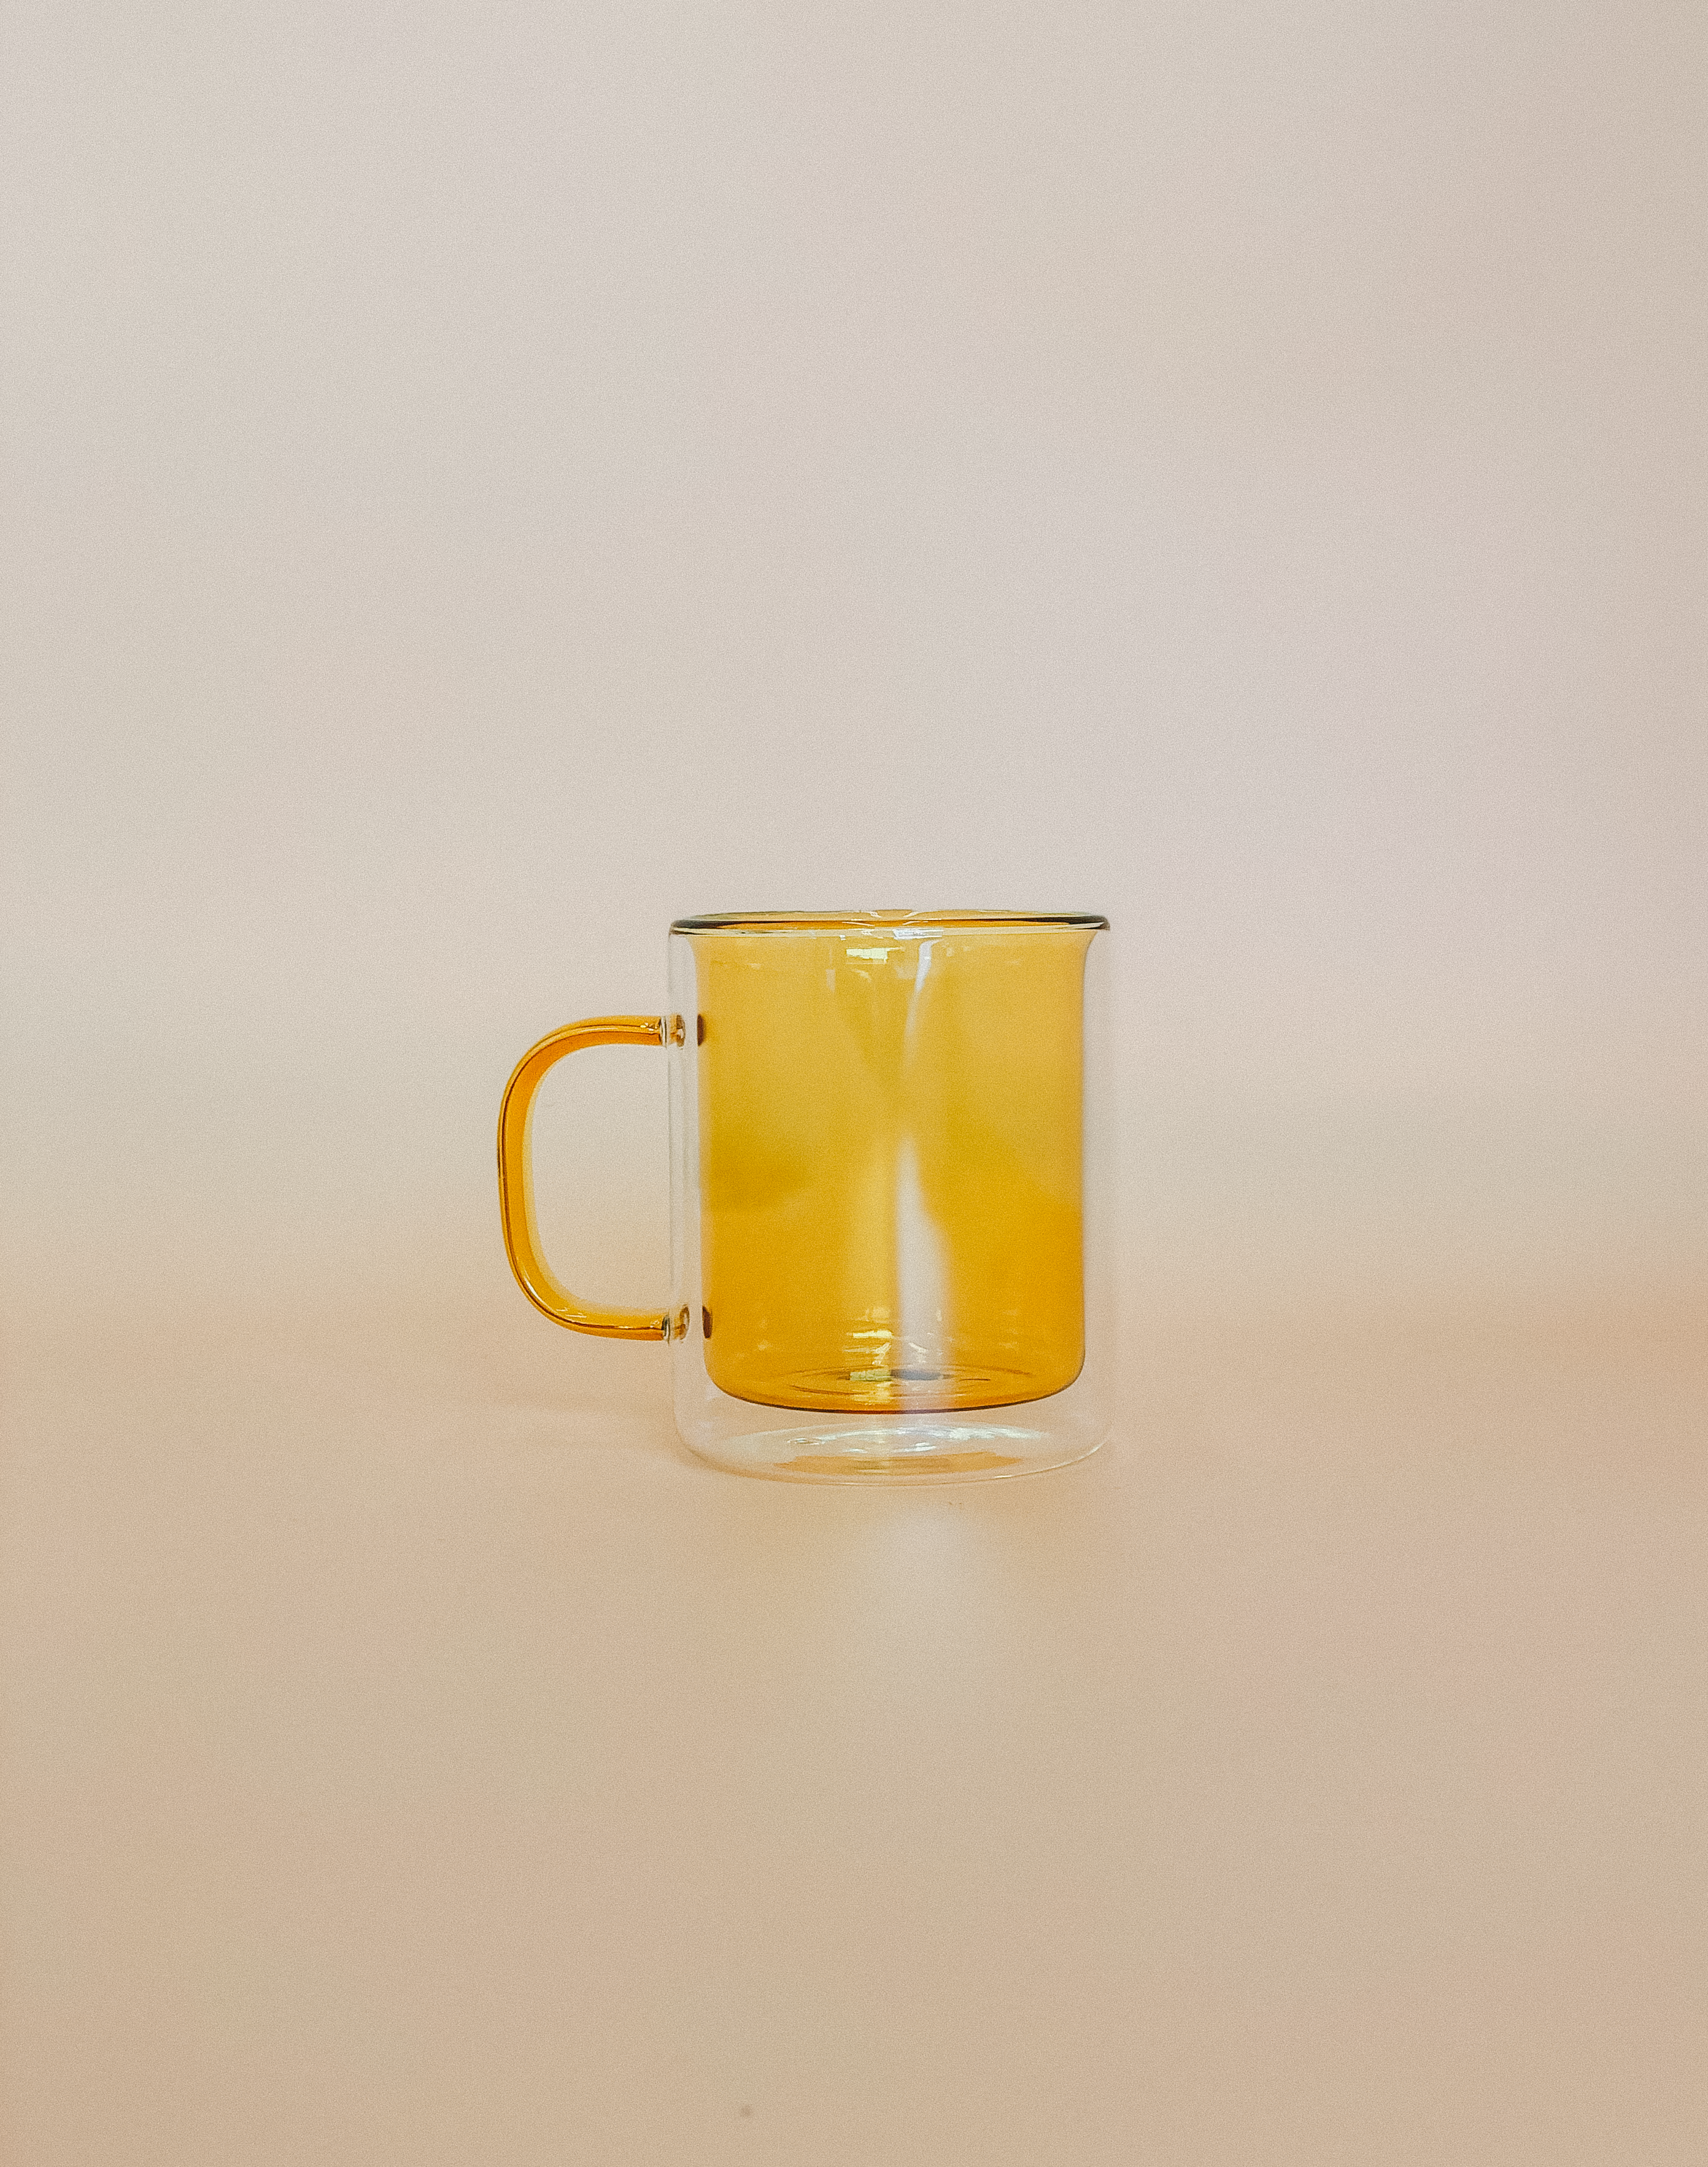 Insulated Coffee Mug by PROSE Tabletop